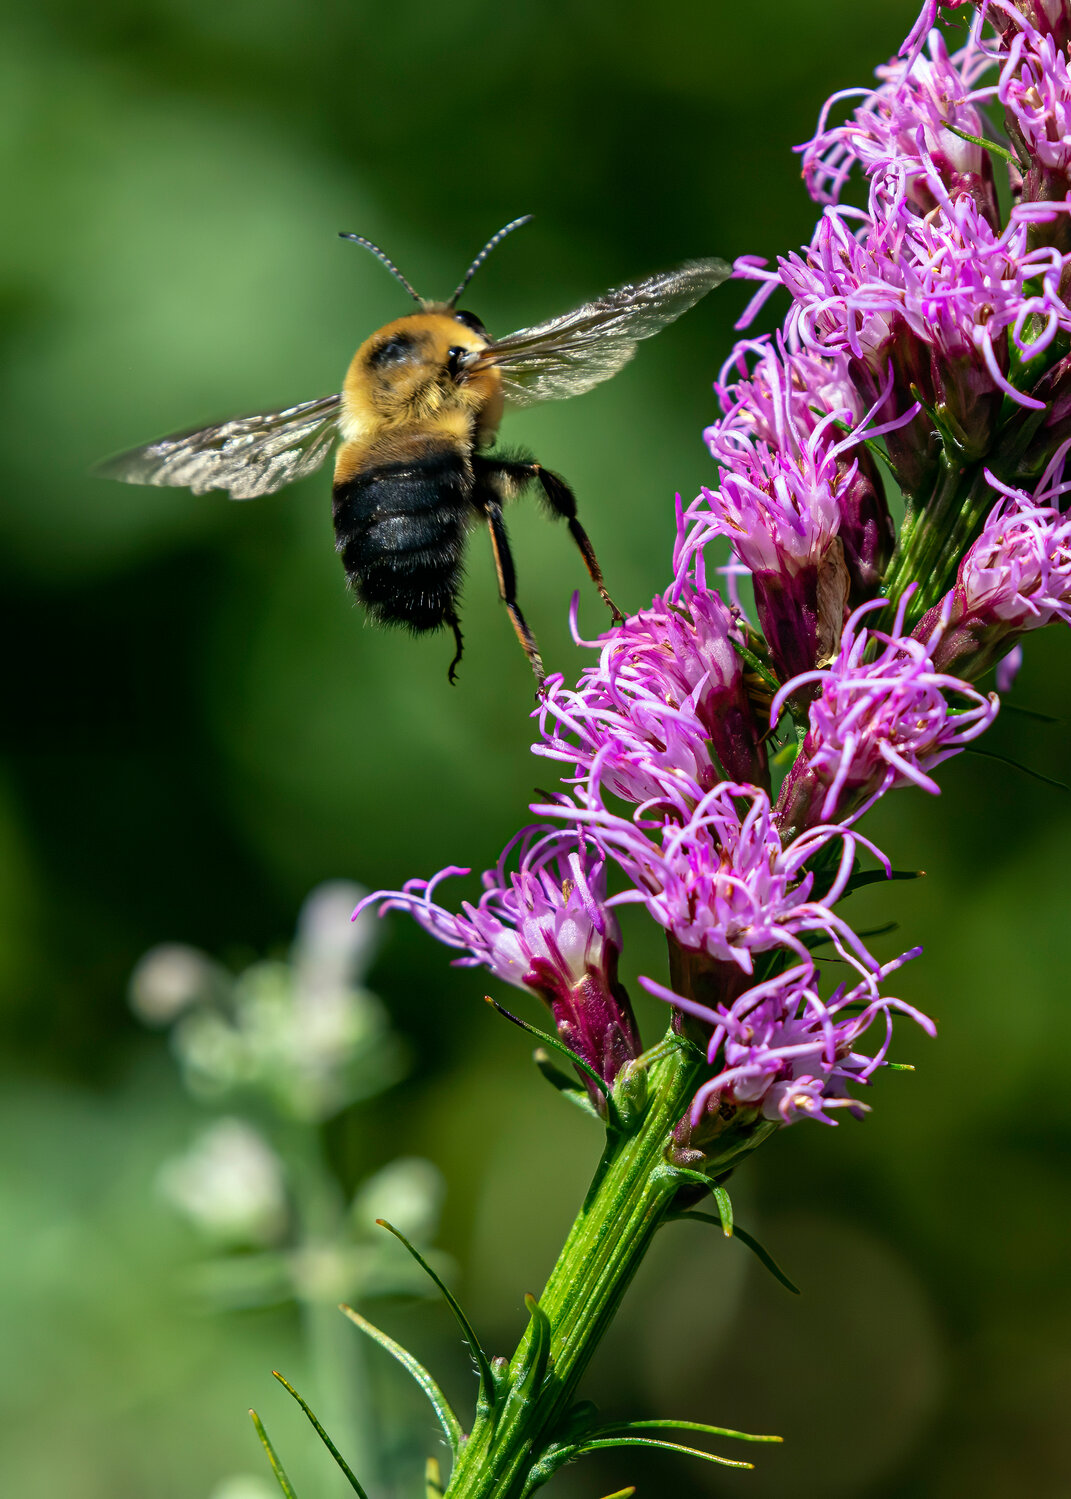 Bumblebee on gayfeathers (Liatris spicata), a native perennial, at Long Hill in Beverly. (Courtesy of Carl Jappe)